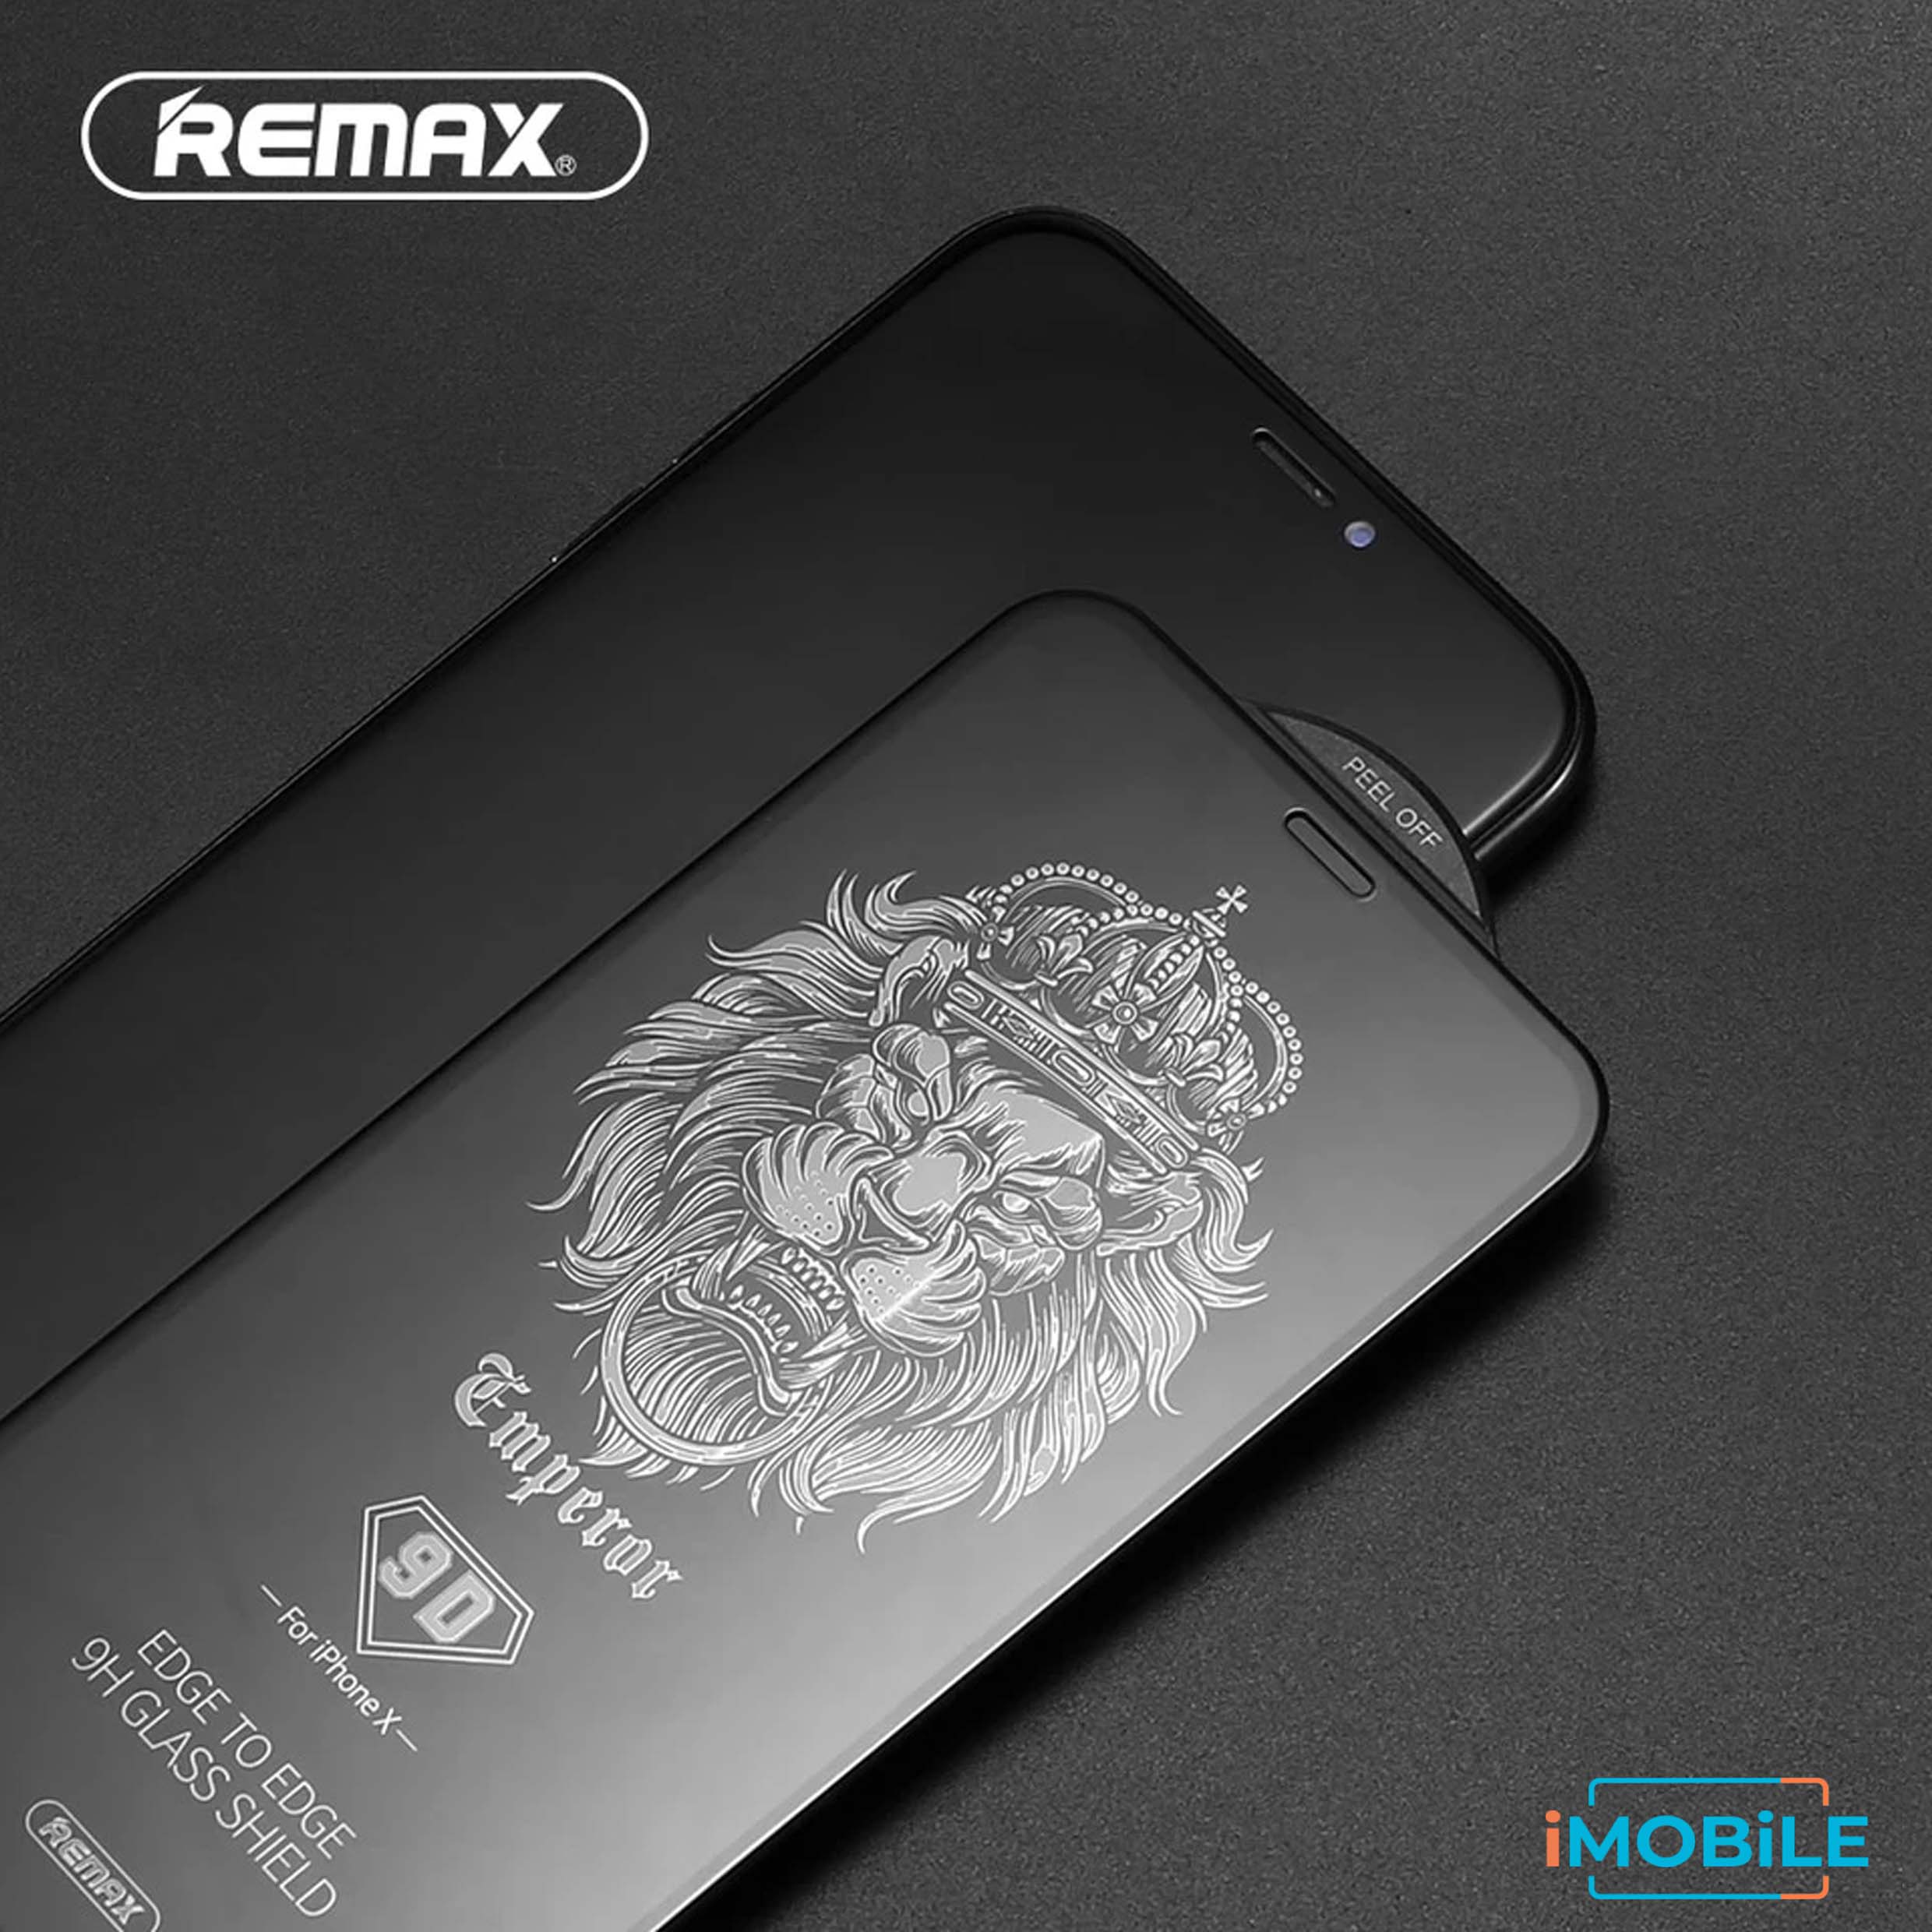 Remax 2.5D Tempered Glass with Envelope Pack, iPhone 7/8 [White]